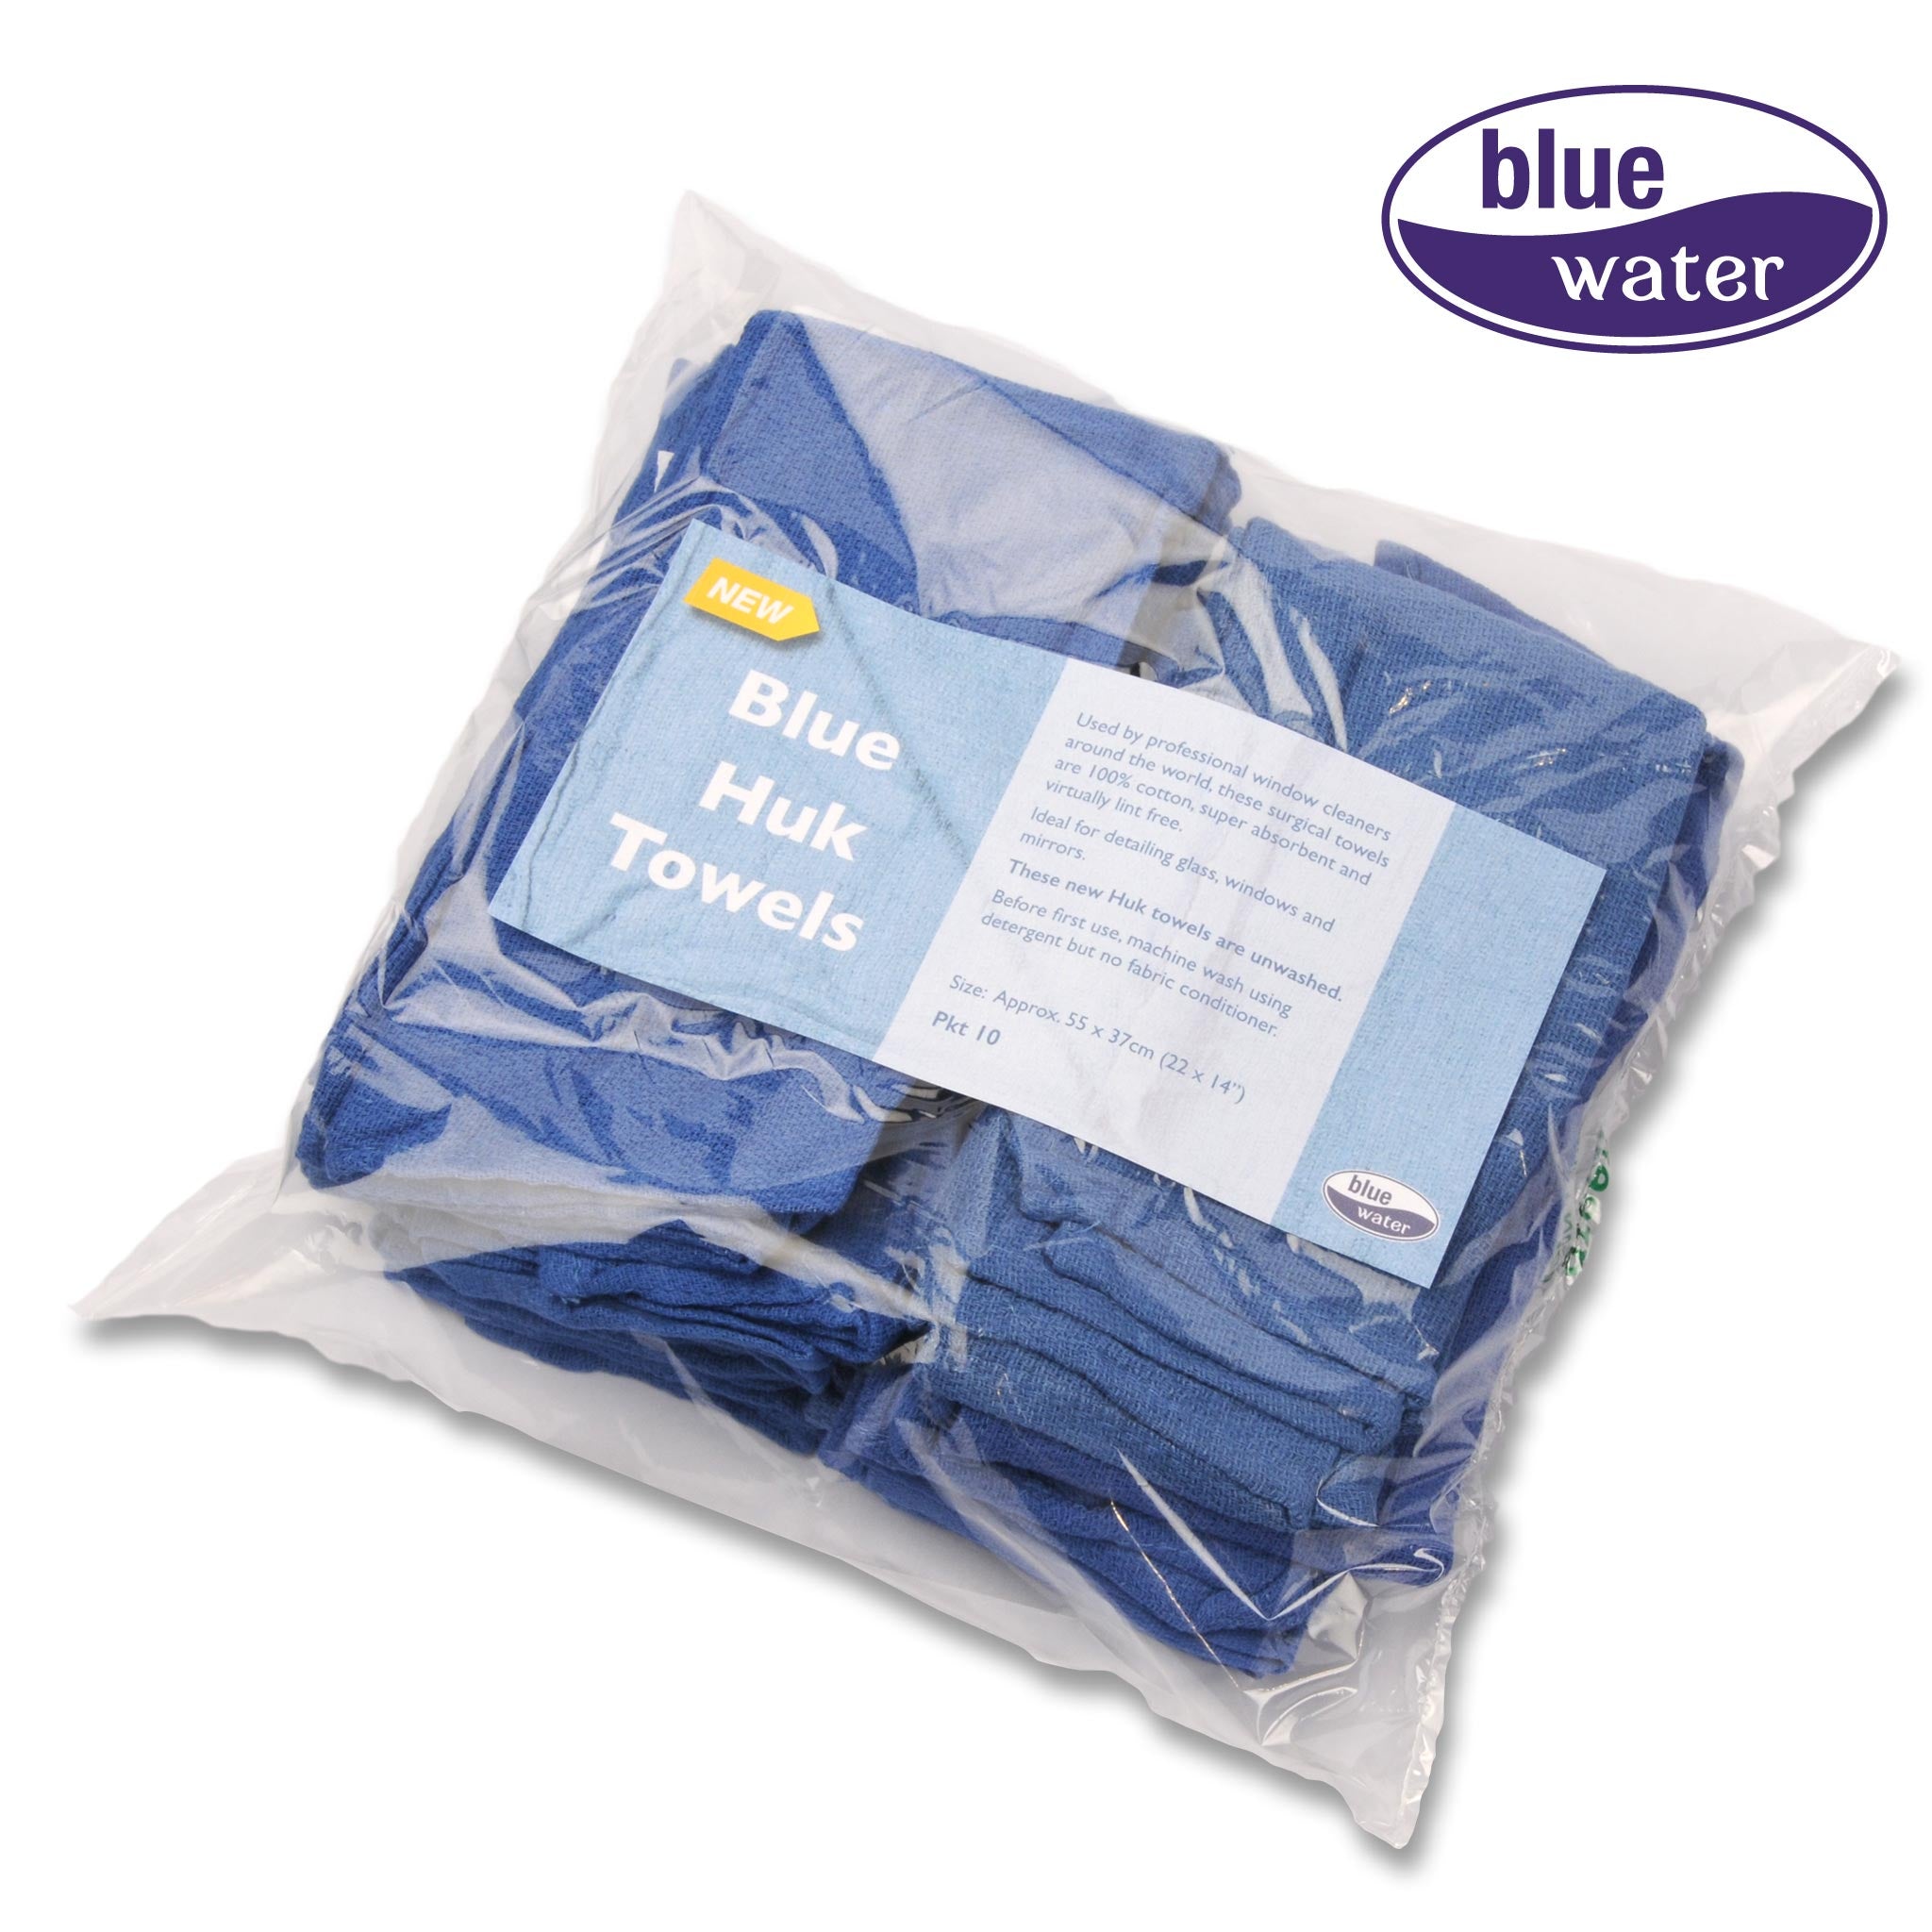 New Bluewater Huk Towels